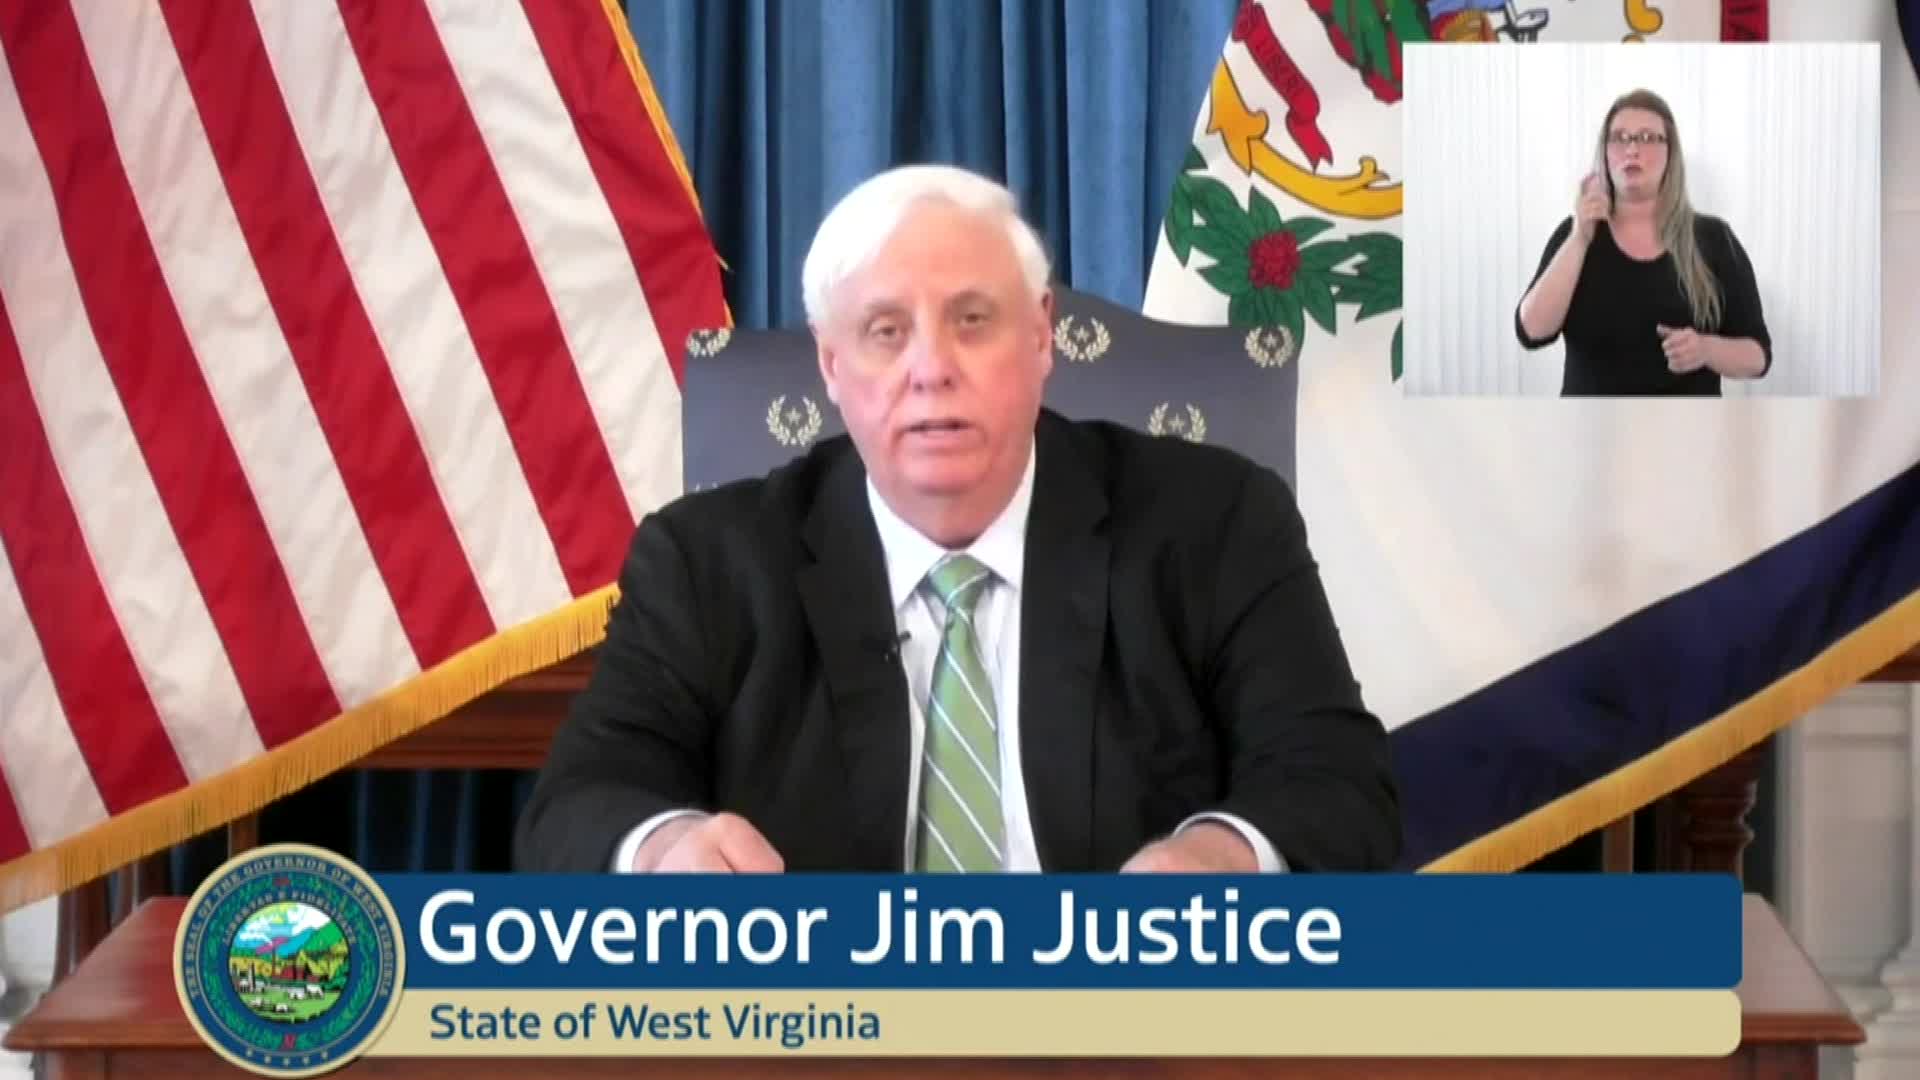 Youtube/Governor Jim Justice